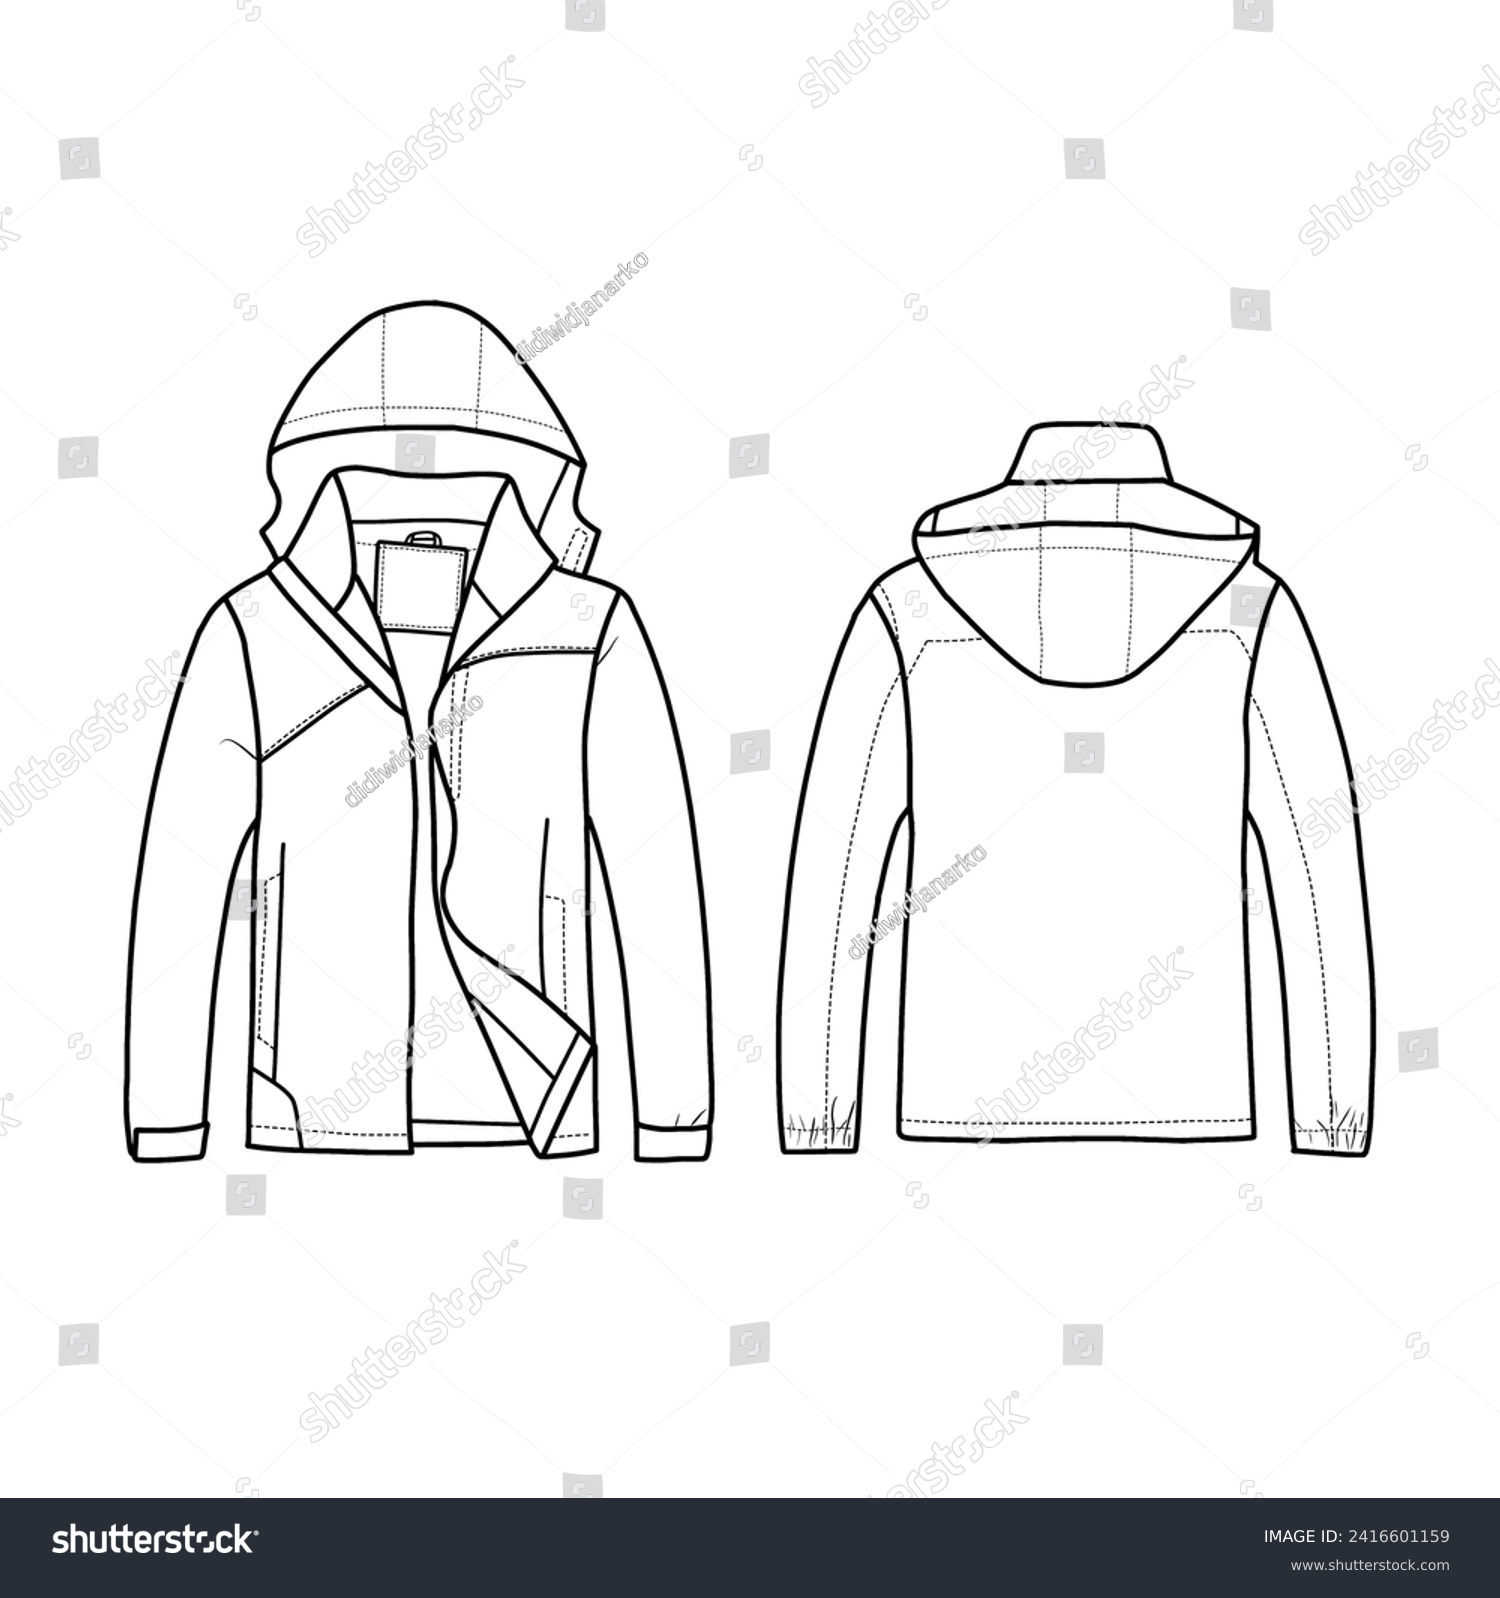 Vector Illustration of Mens Jacket Waterproof Lightweight Mountain Sport Jacket design Line art. Hand drawn front and rear view. Men Hooded Windbreaker Raincoat, Isolated on white background #2416601159